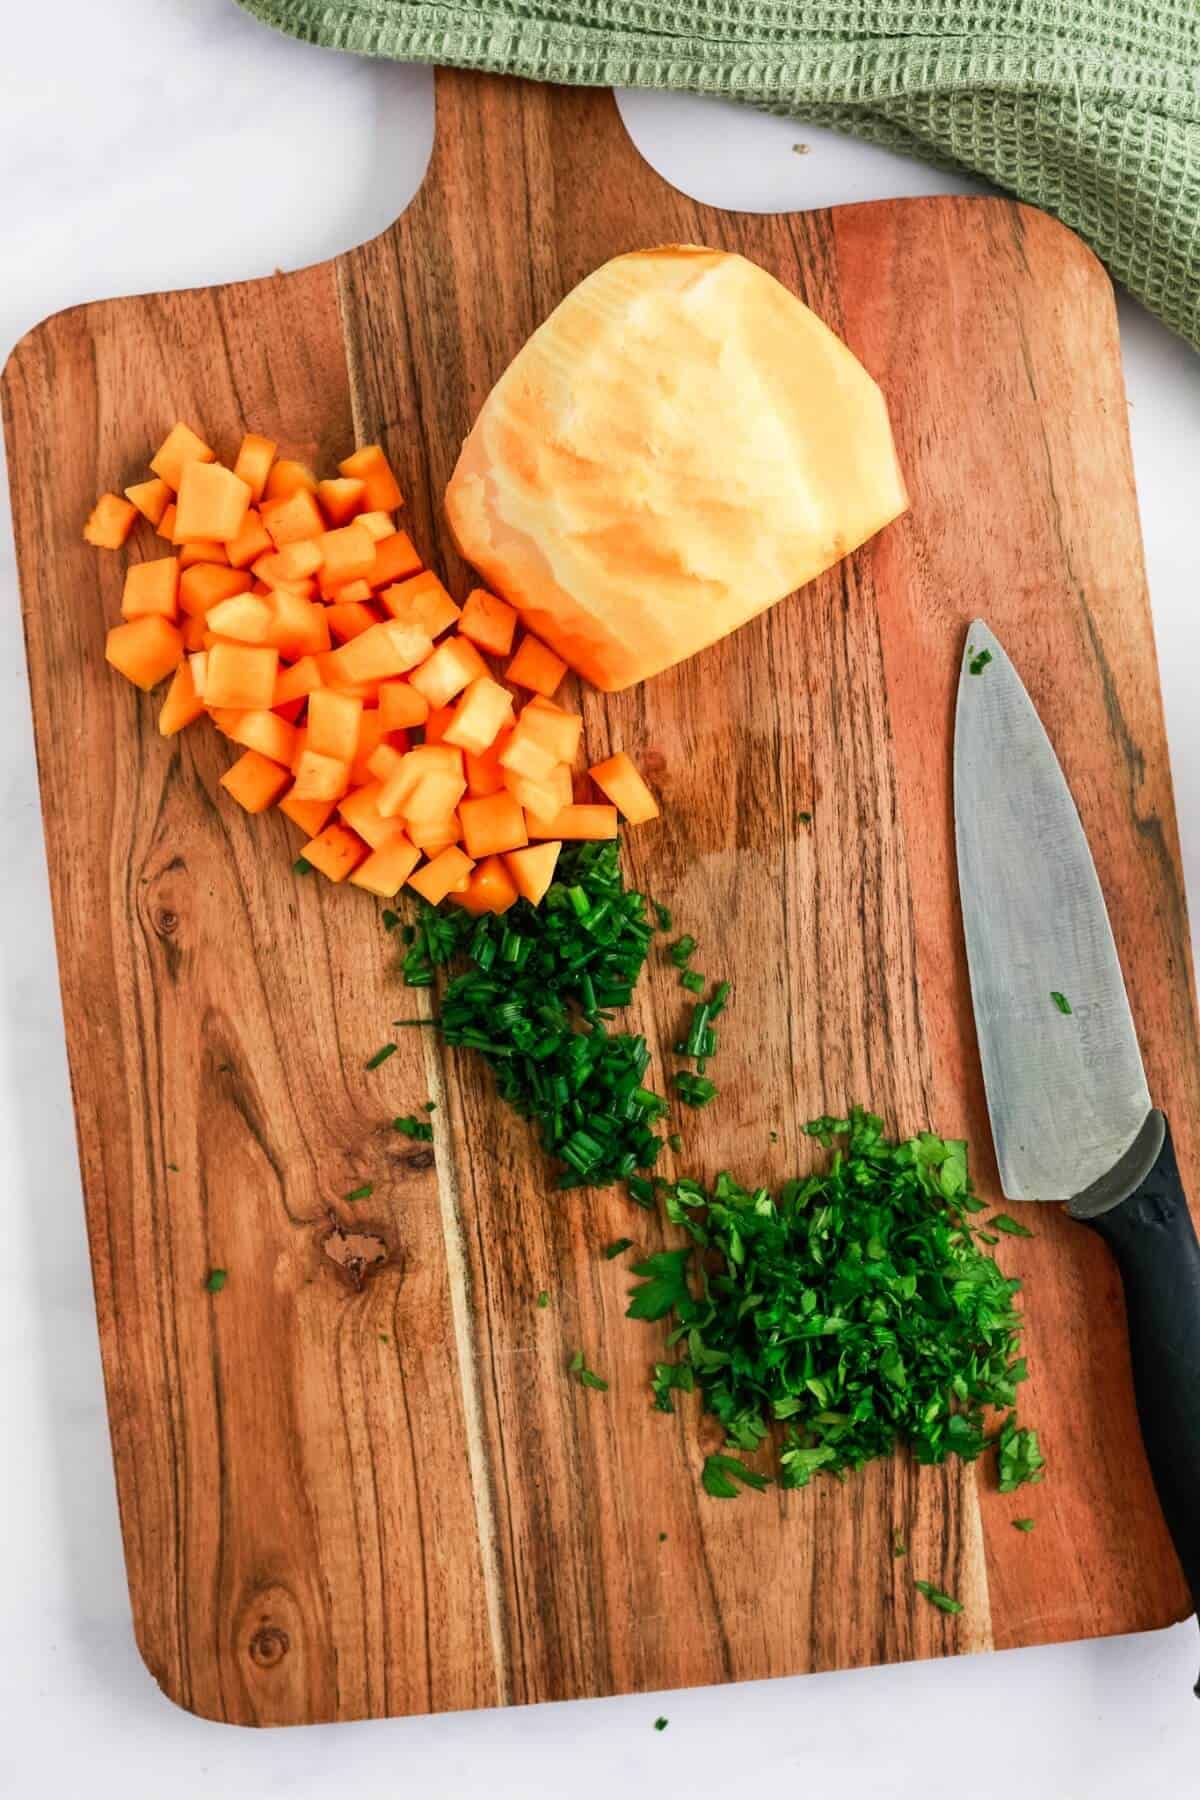 Chopped butternut squash and fresh herbs on a chopping board with a knife.